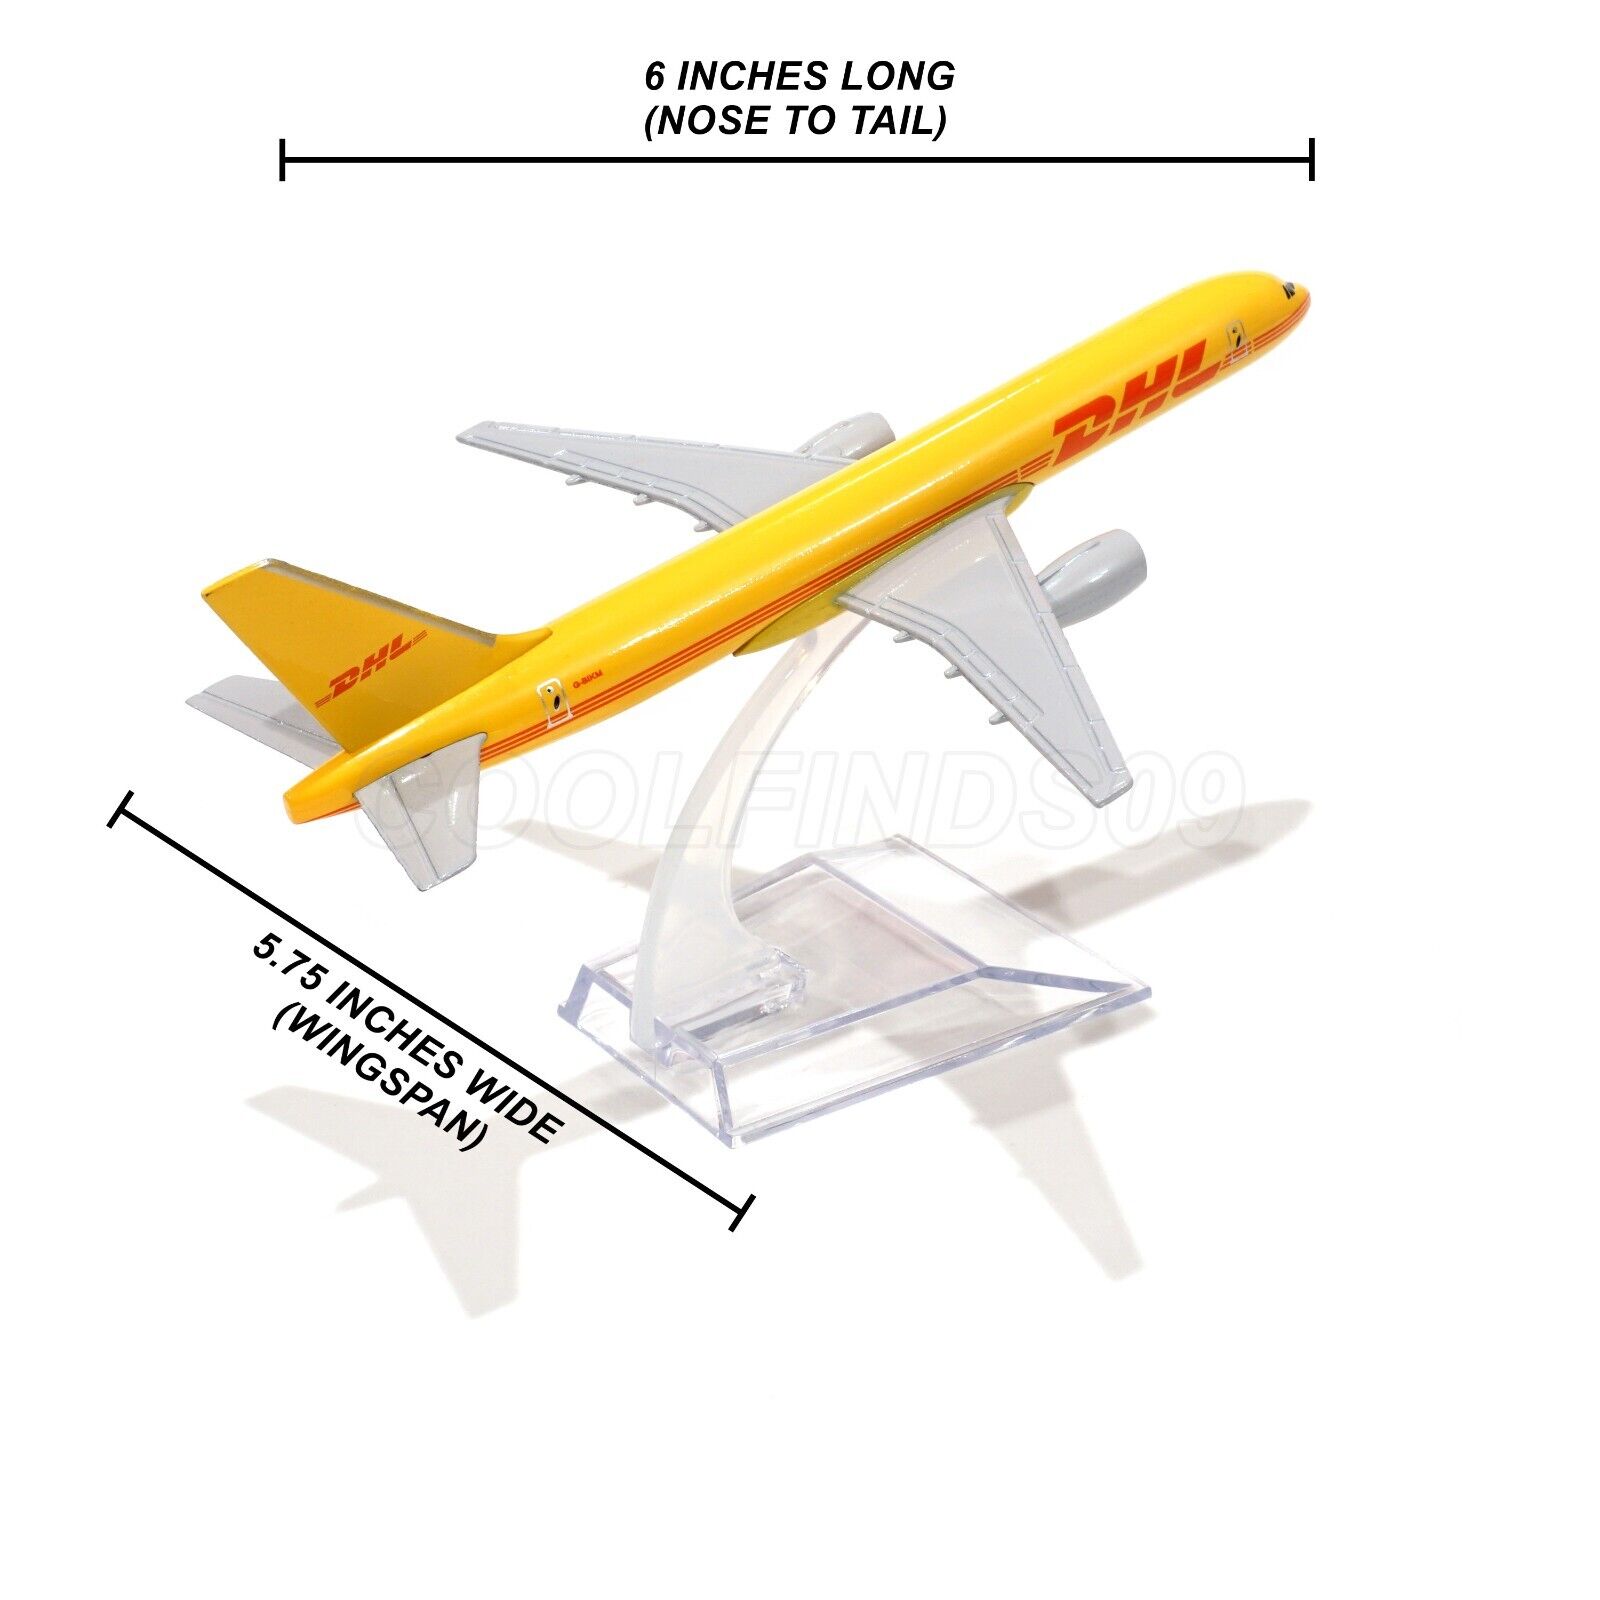 DHL Die-Cast Commerical Model Plane Boeing B757 Kit HPM16-101 with Stand